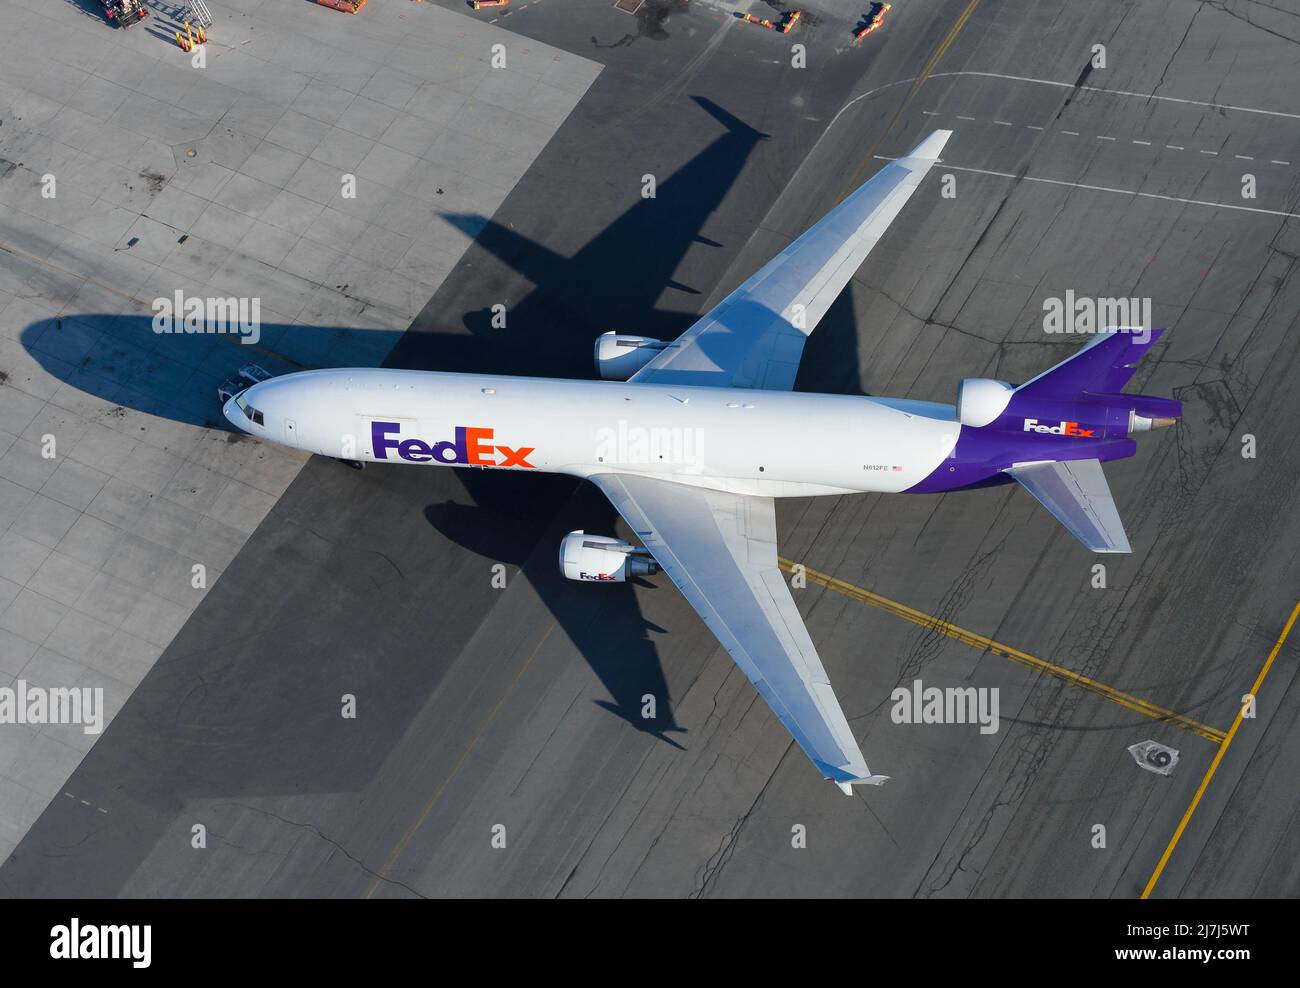 Fedex McDonnell Douglas MD-11 aircraft. Airplane for cargo transport for Federal Express. Aerial view of MD11 plane. Stock Photo